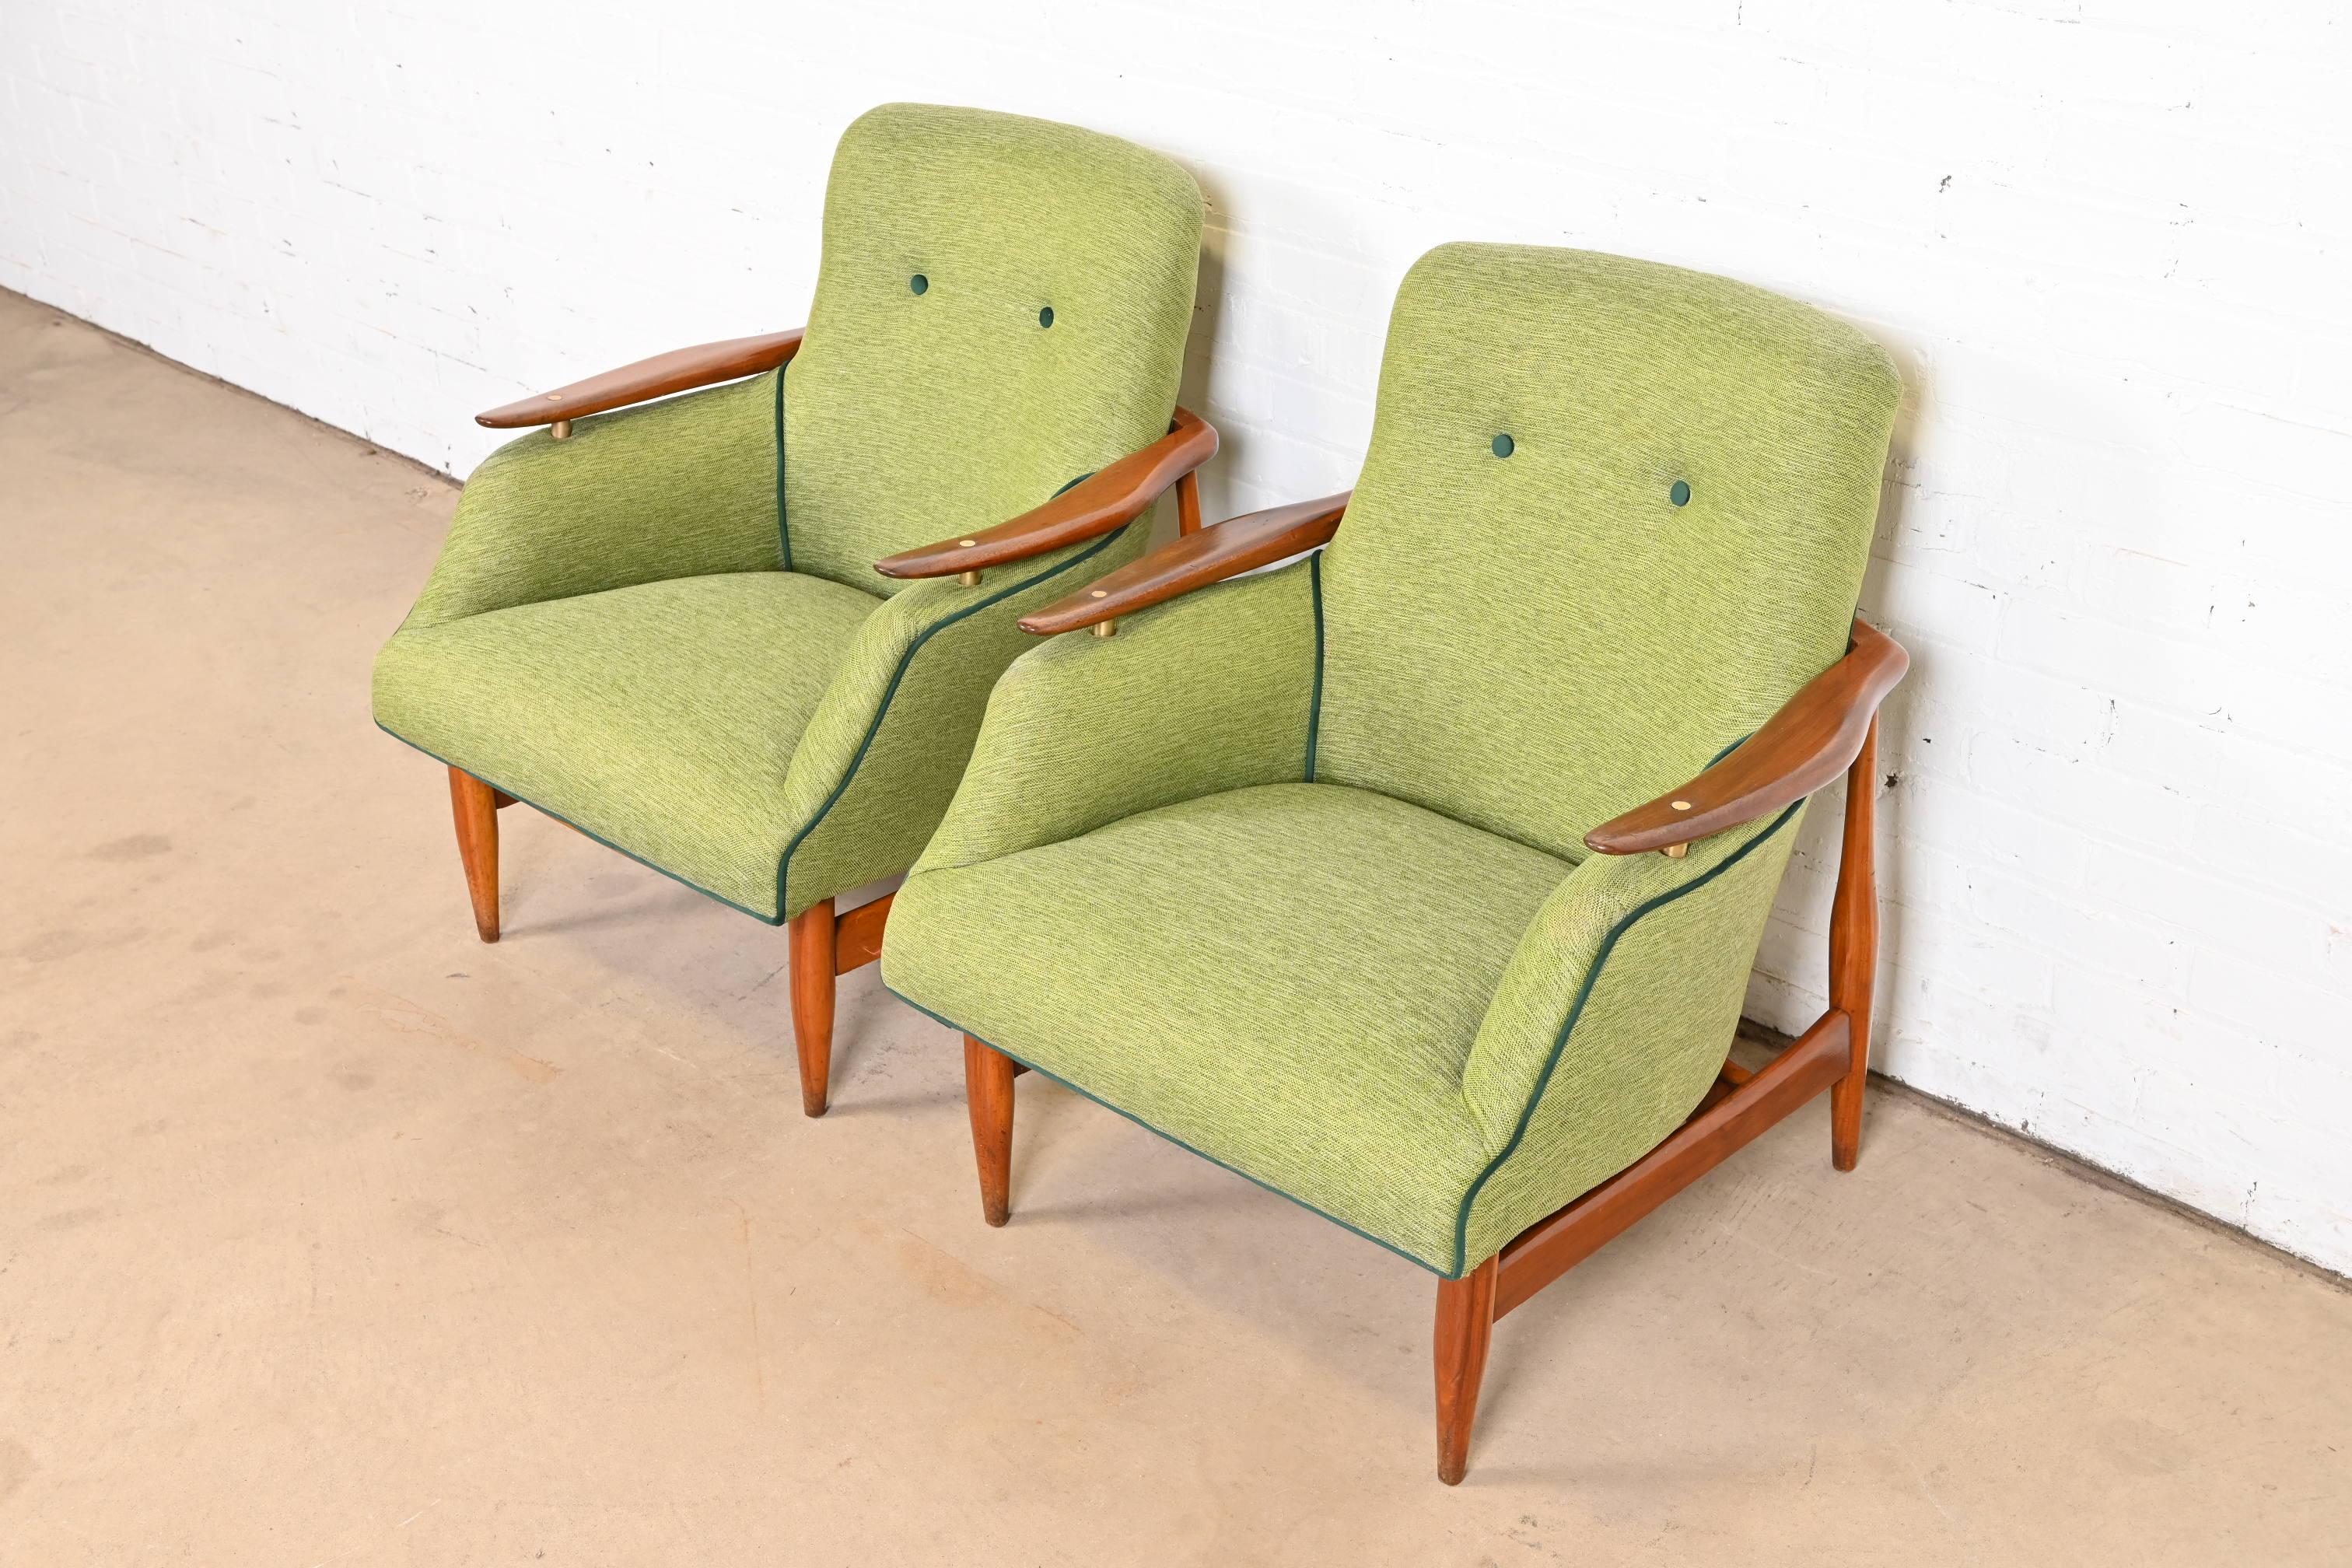 Finn Juhl Danish Modern Upholstered Teak Lounge Chairs, Pair In Good Condition For Sale In South Bend, IN